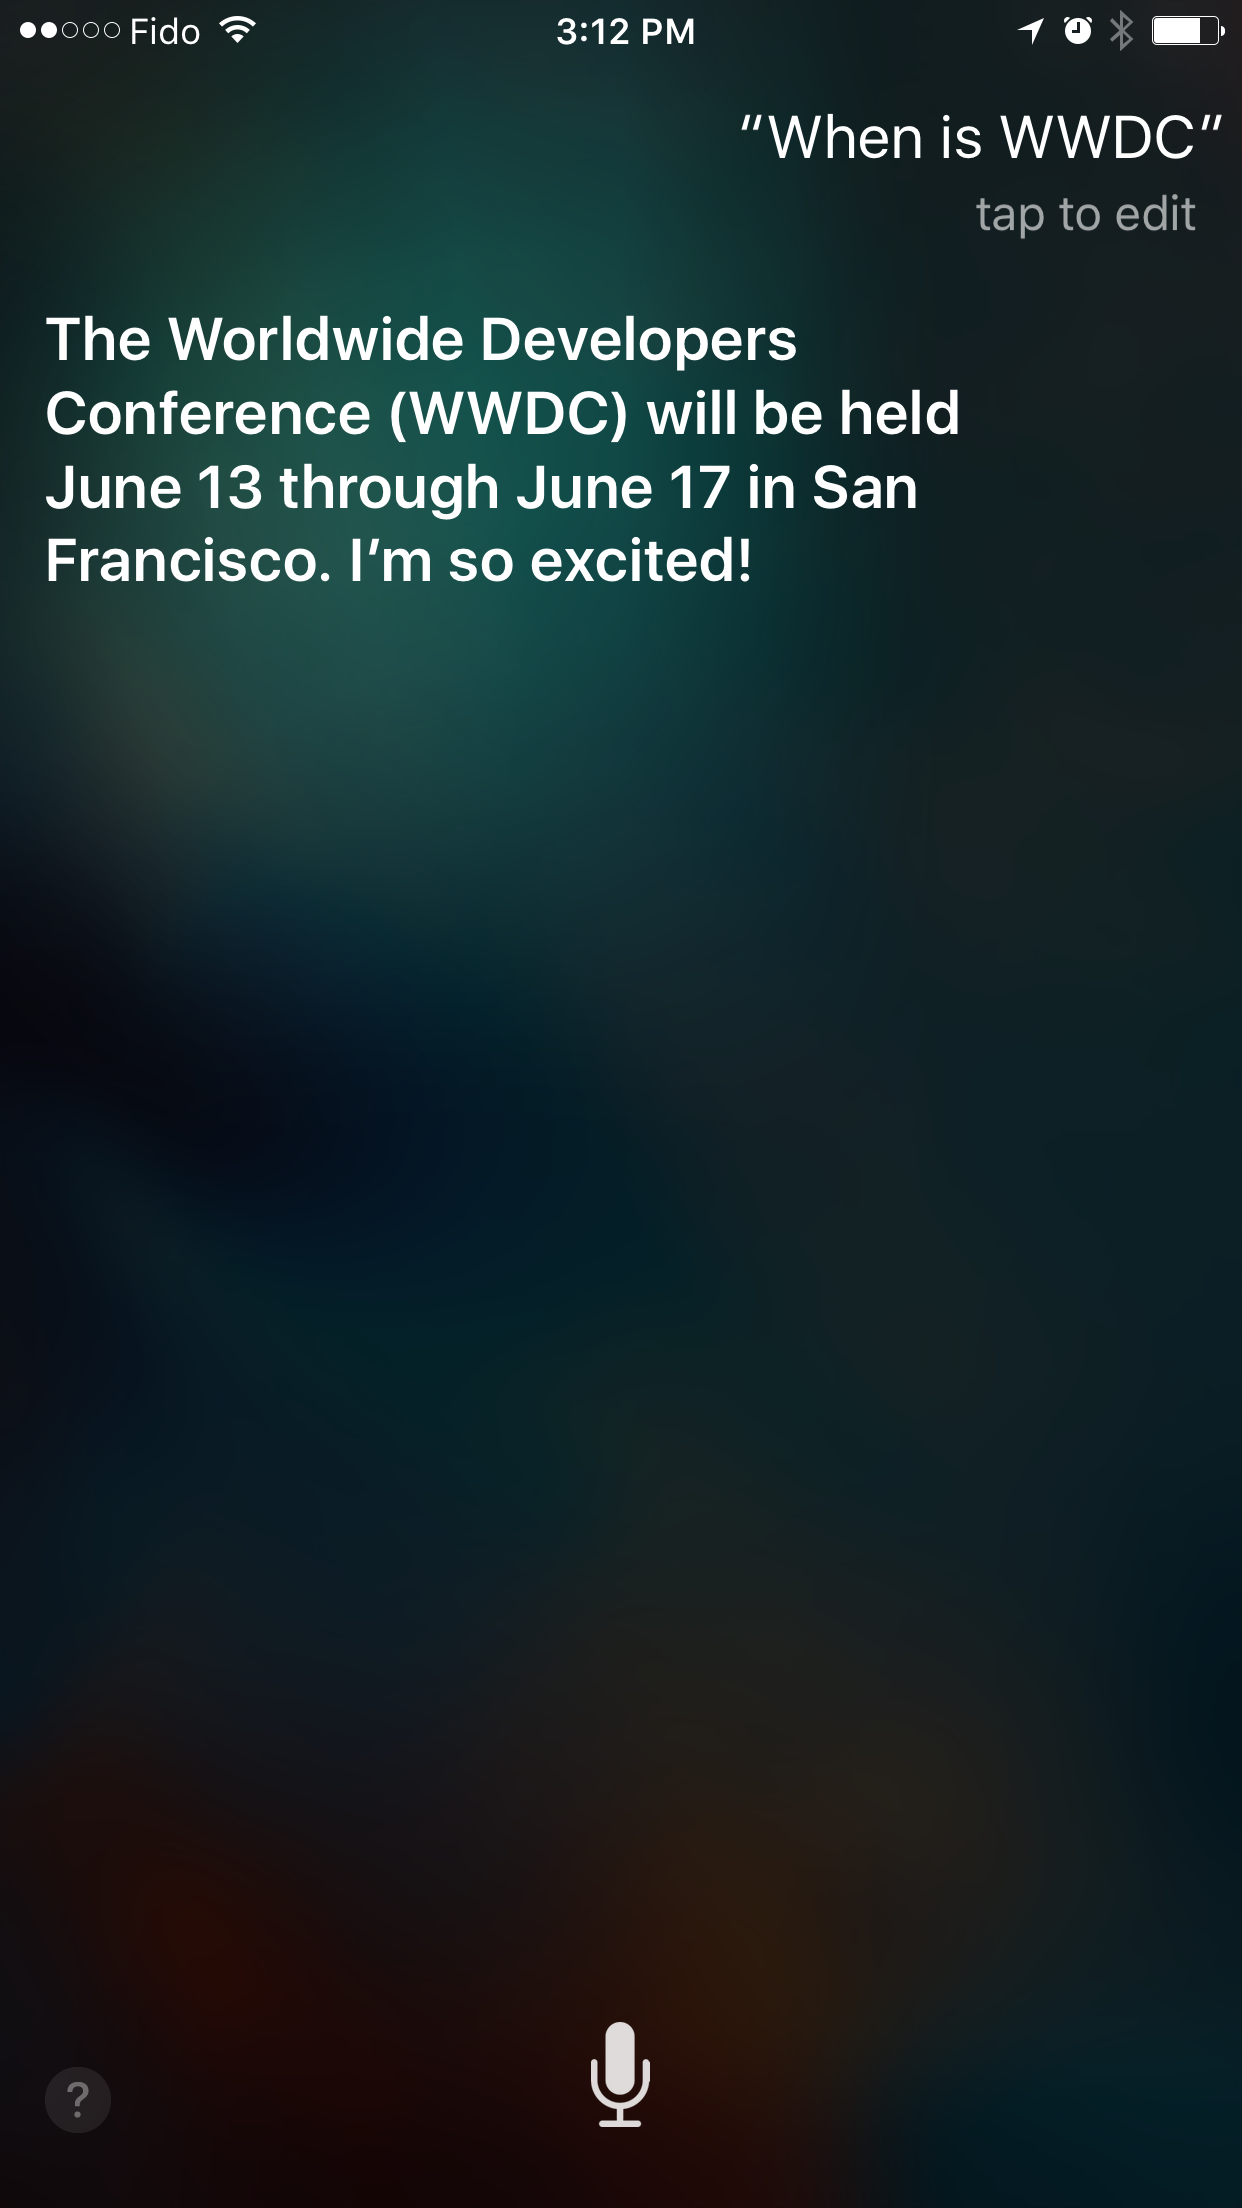 Siri Leaks Dates for WWDC: June 13th to June 17th